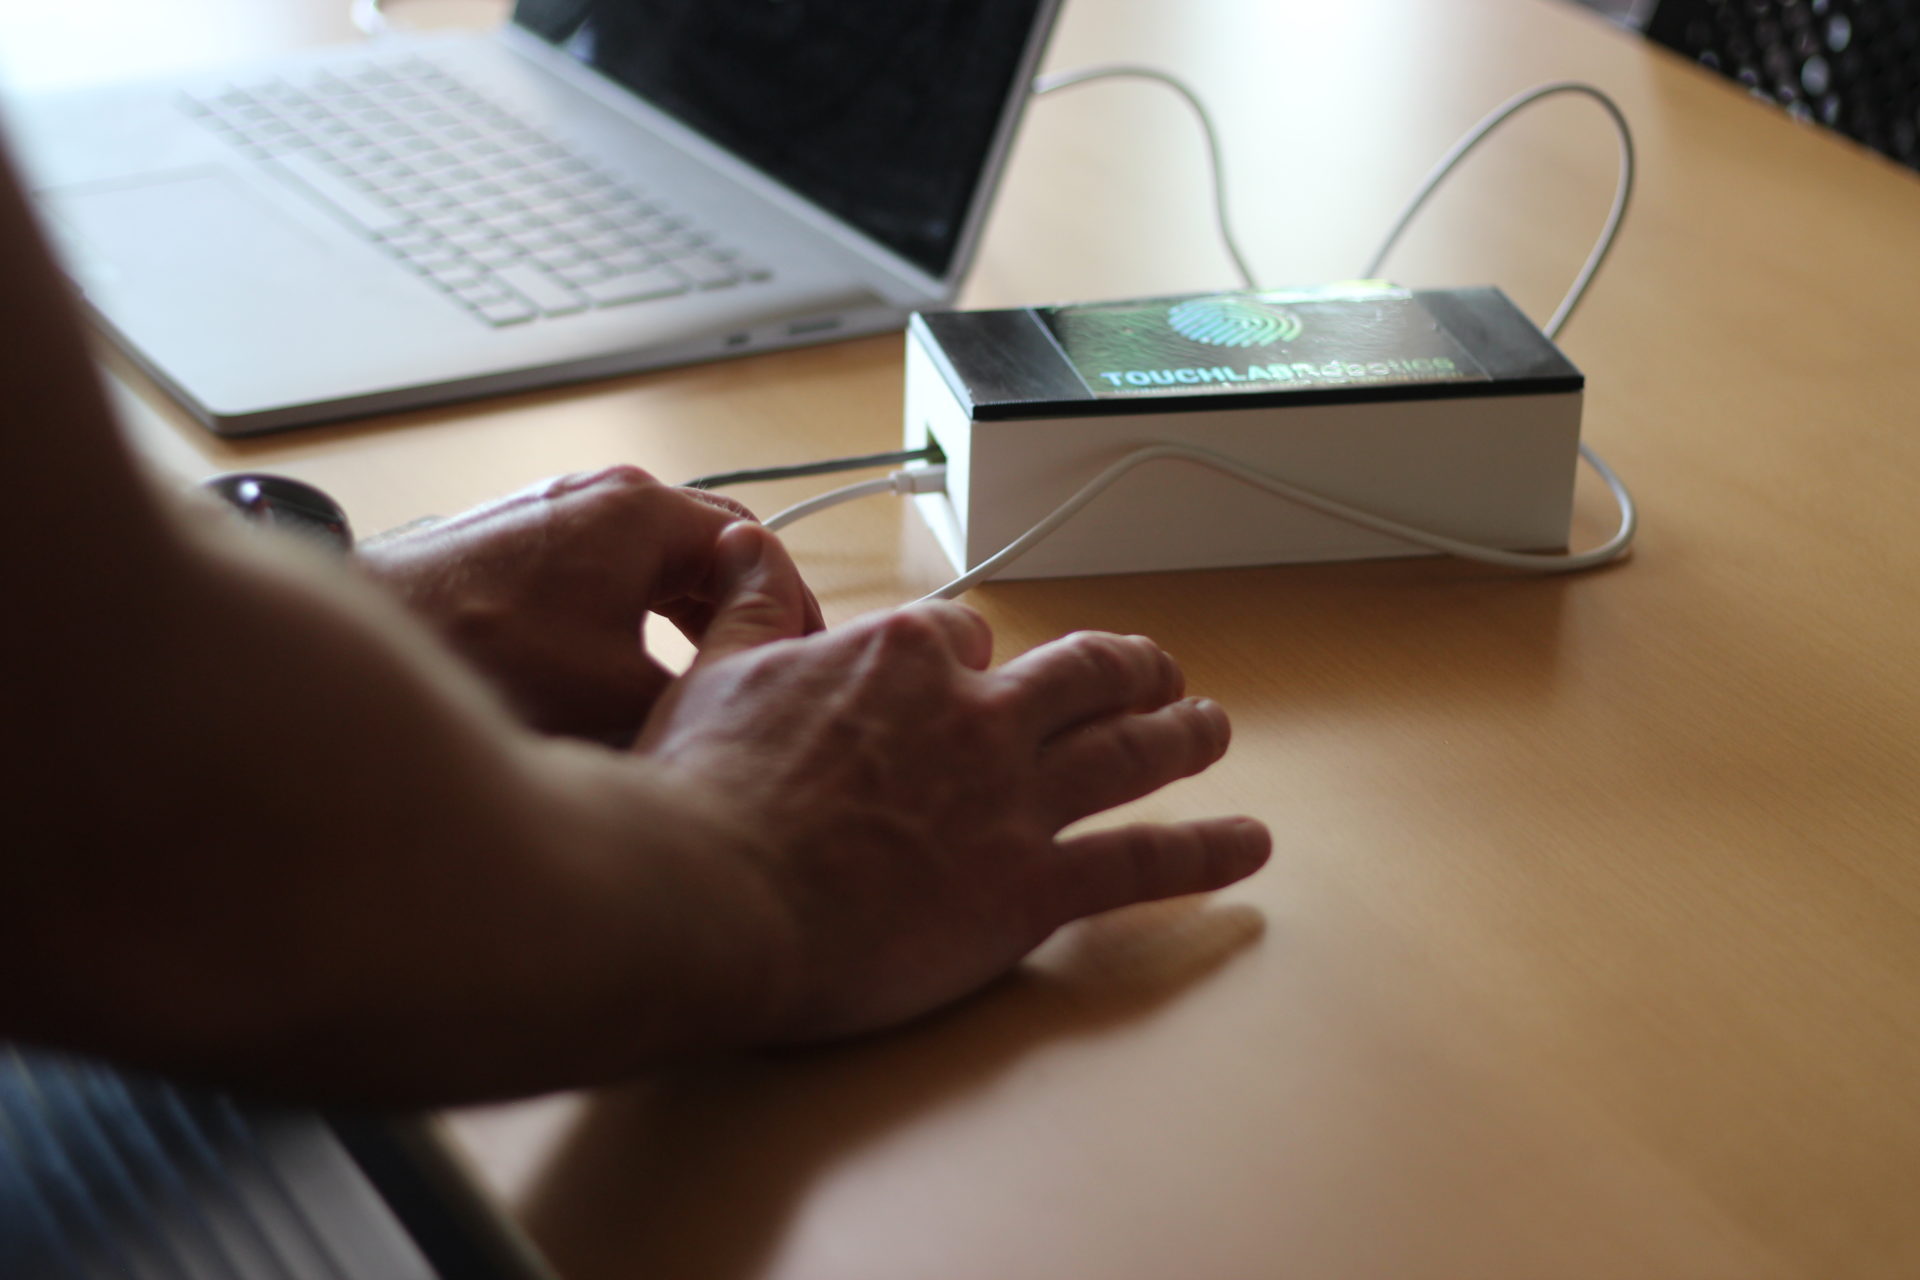 A close-up of Ray Holt’s hands demonstrating remote social haptics technology.